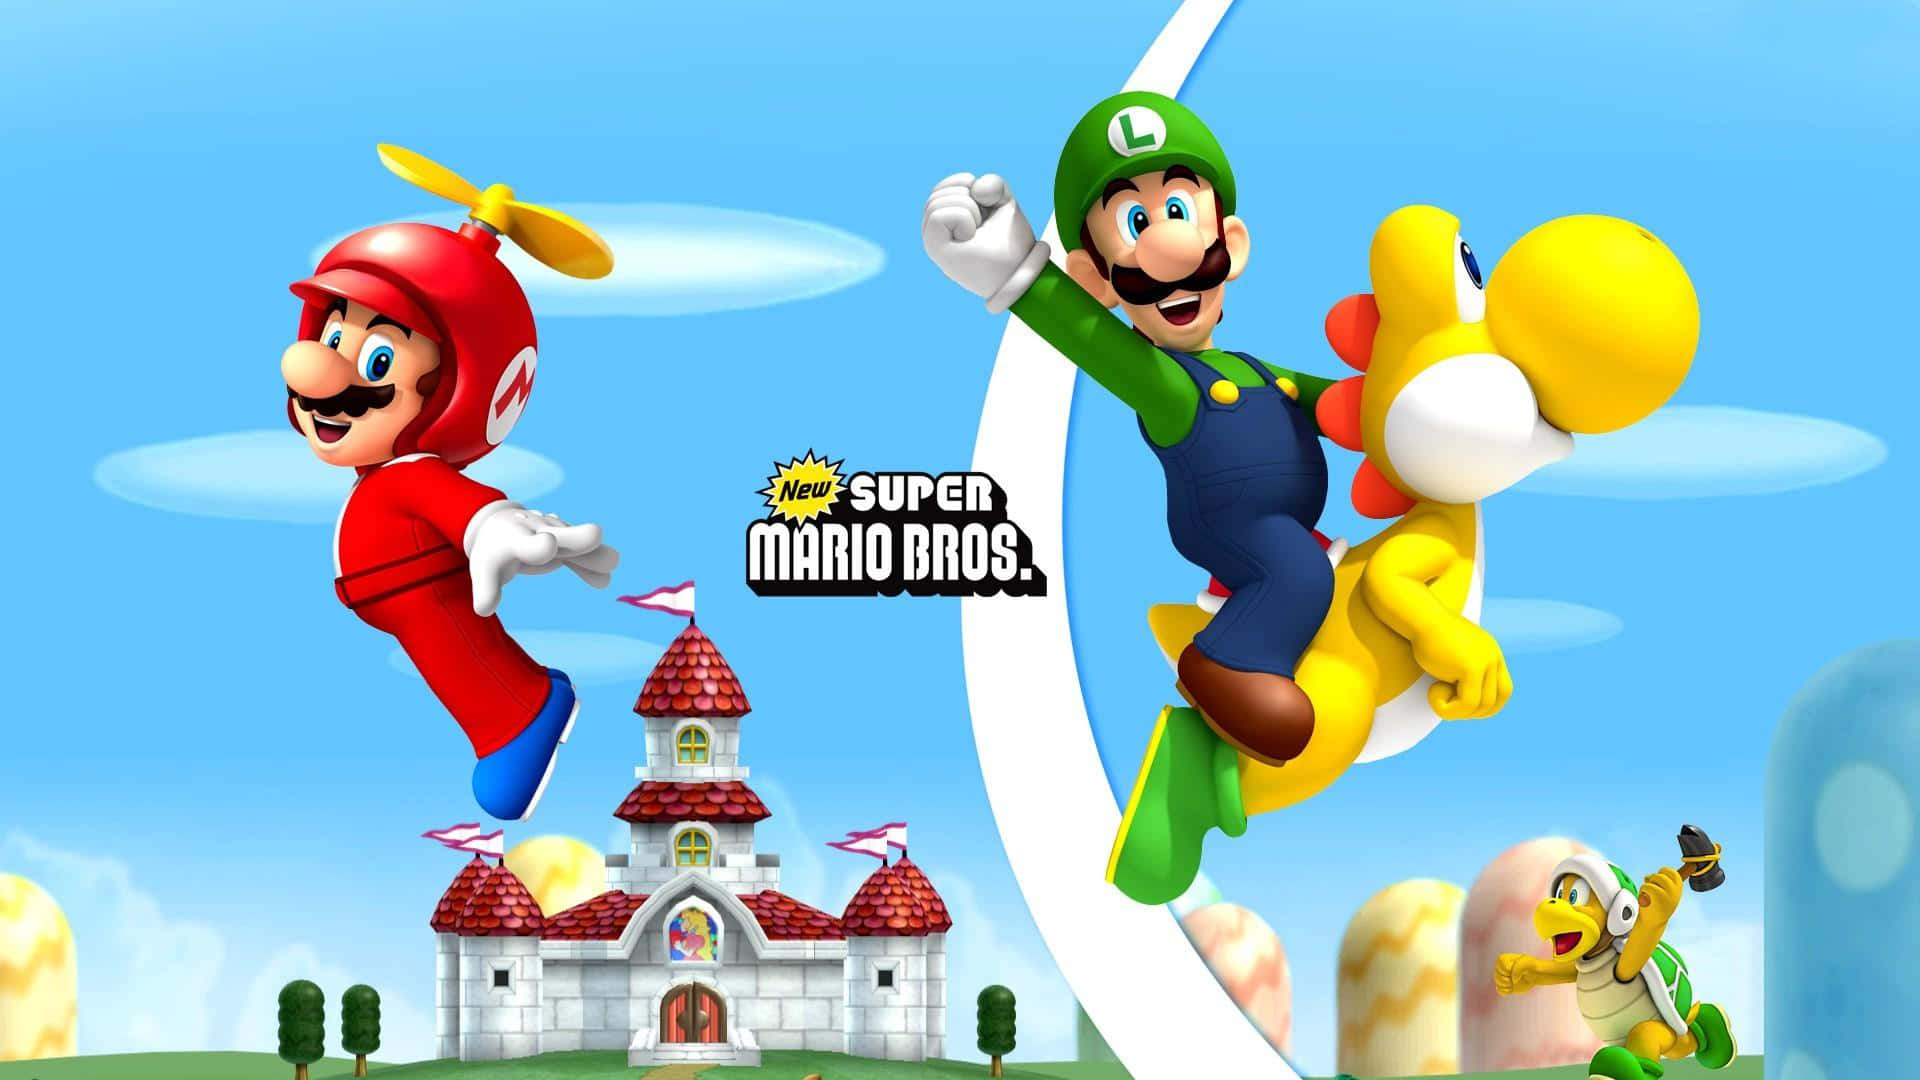 Mario Jumping in a Sunny Outdoors: